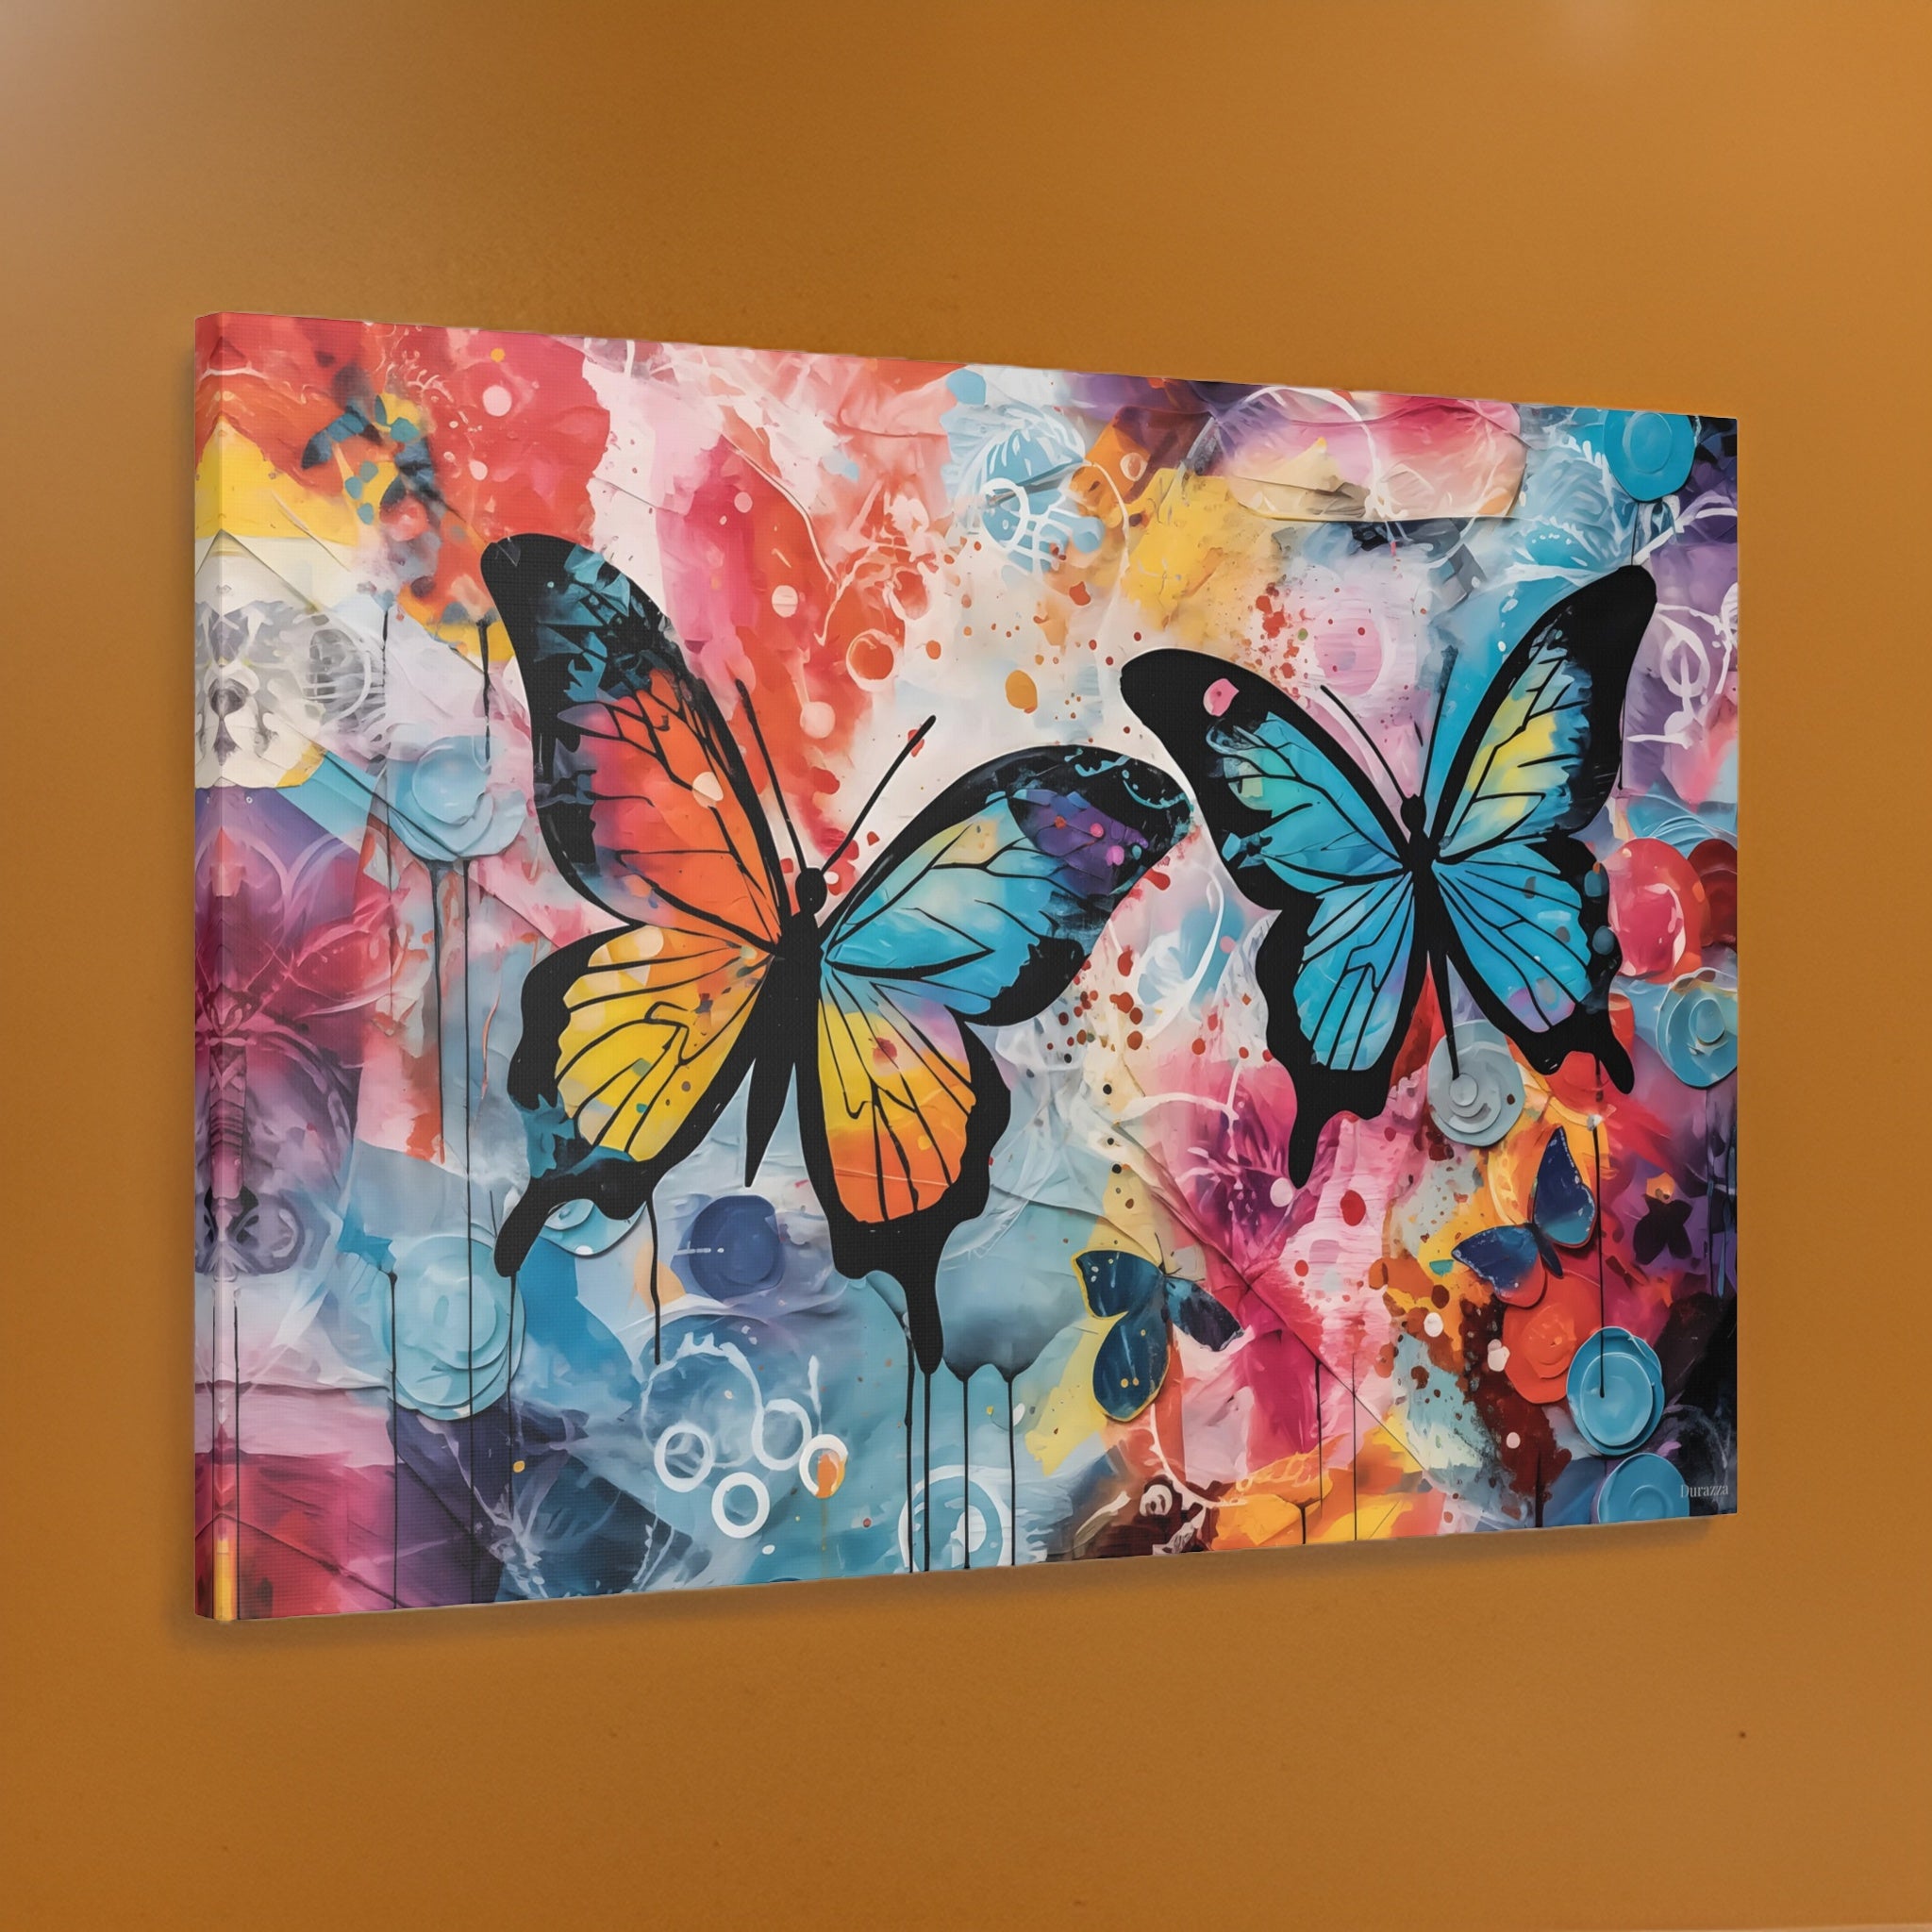 Butterfly Burst Wall Art: Vibrant Watercolor Painting